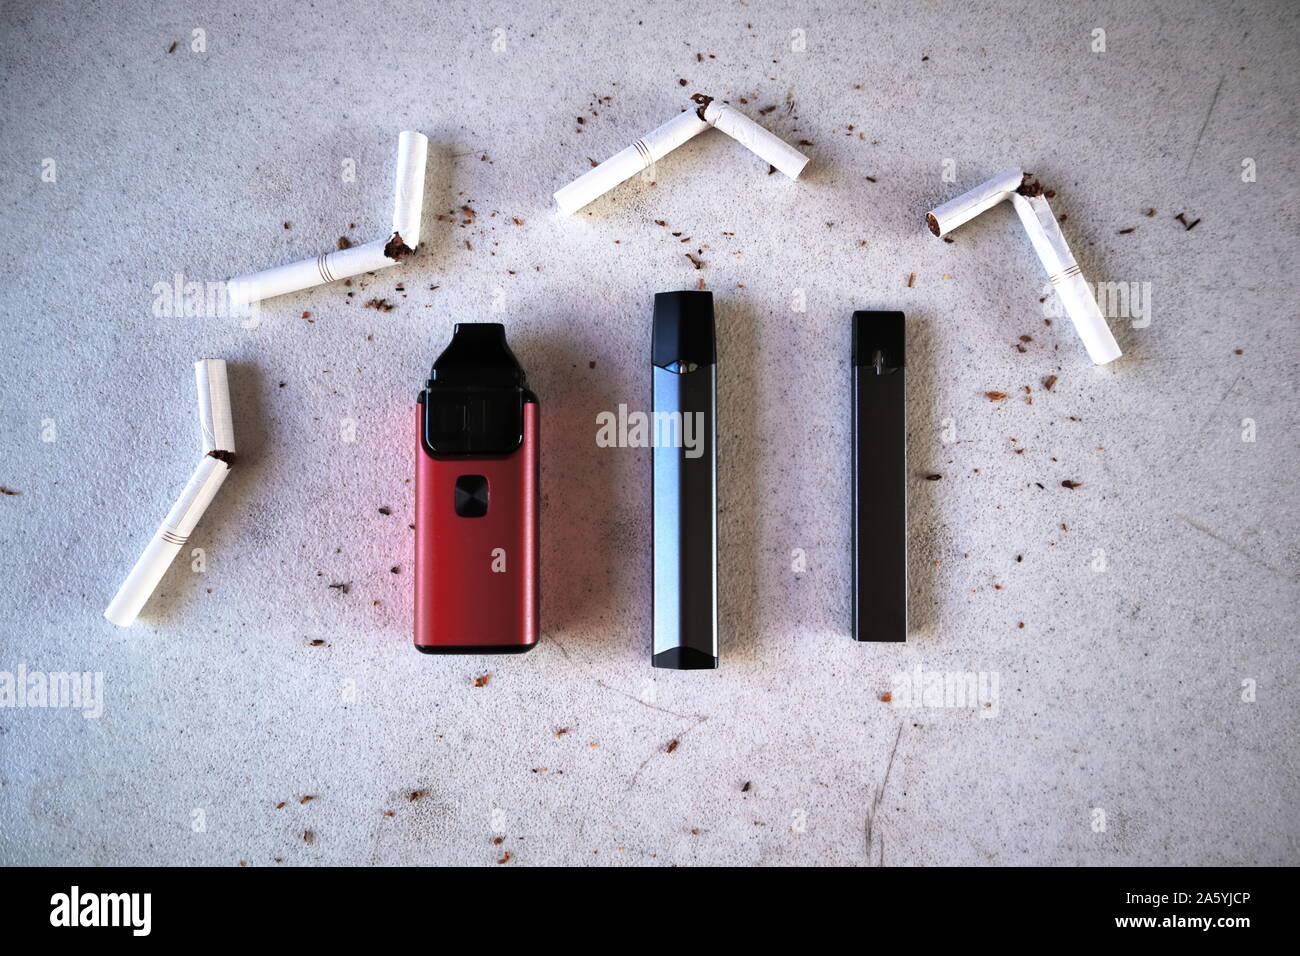 Different vape devices electronic cigarettes as smoking alternatives with broken cigarettes and scattered tobacco on white textured background Stock Photo